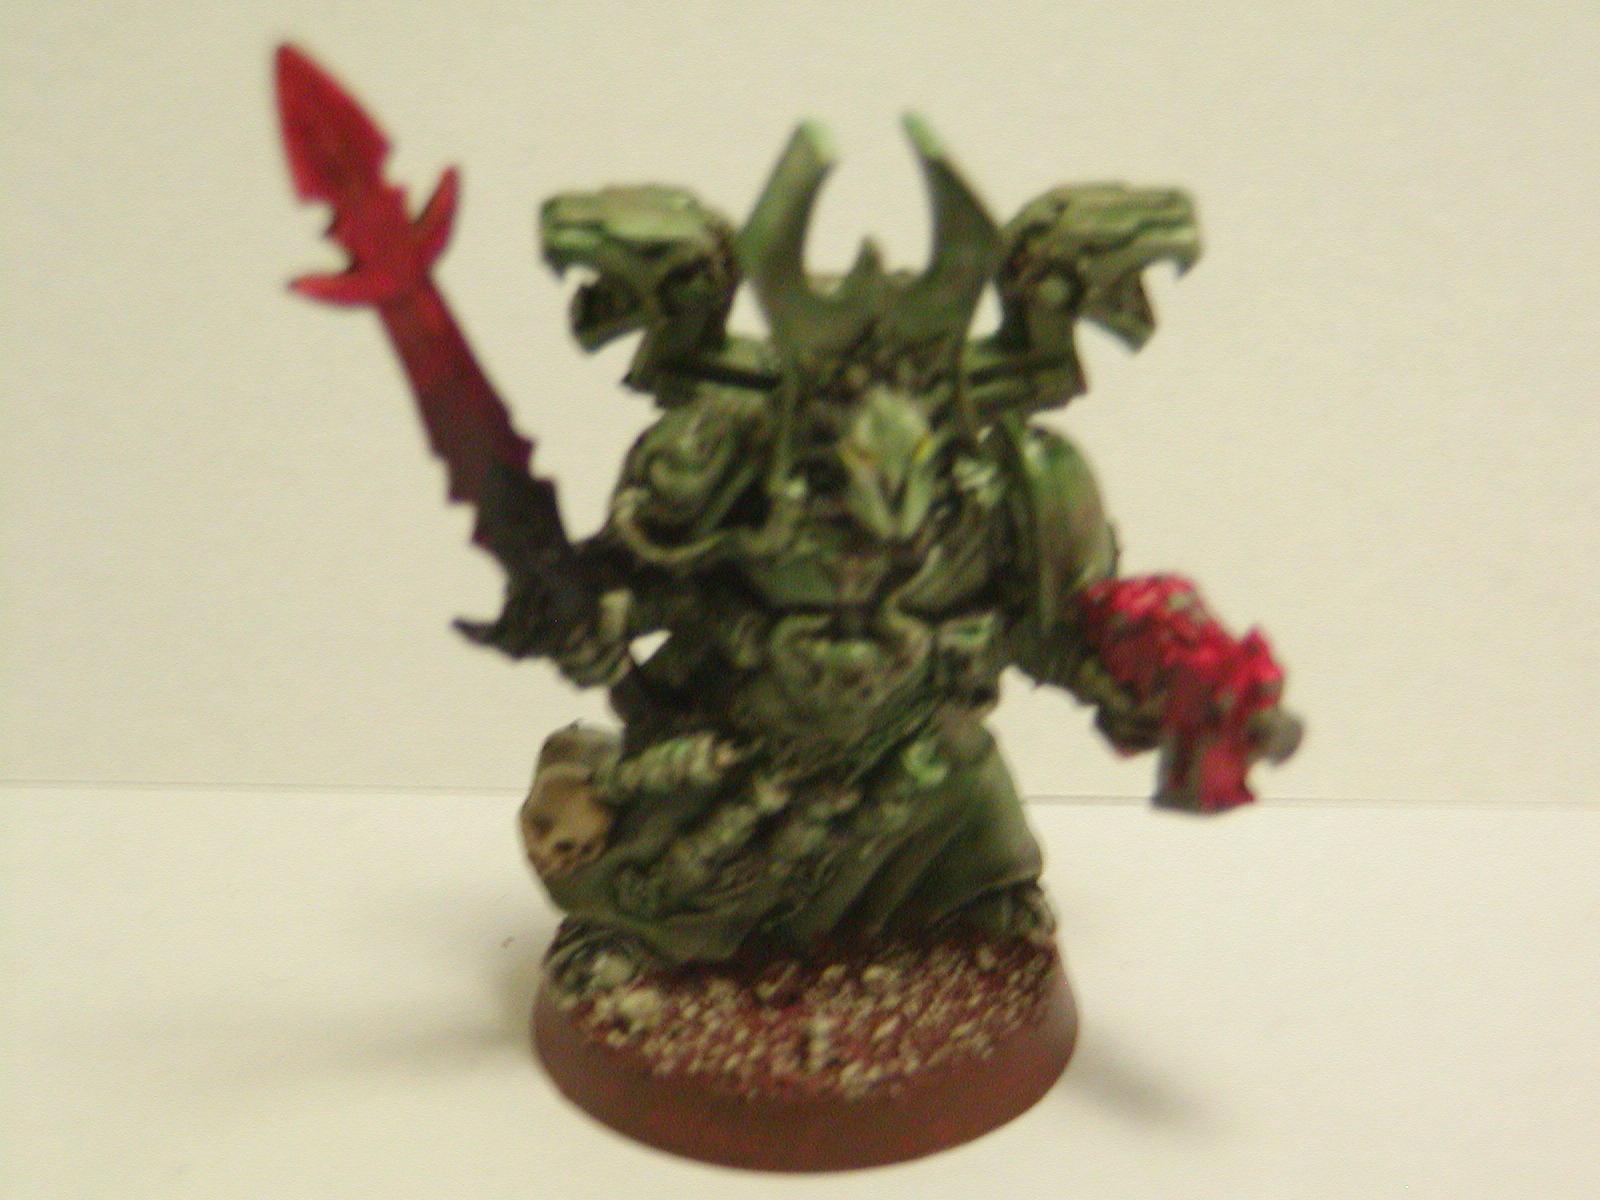 Chaos Space Marines, Death Guard